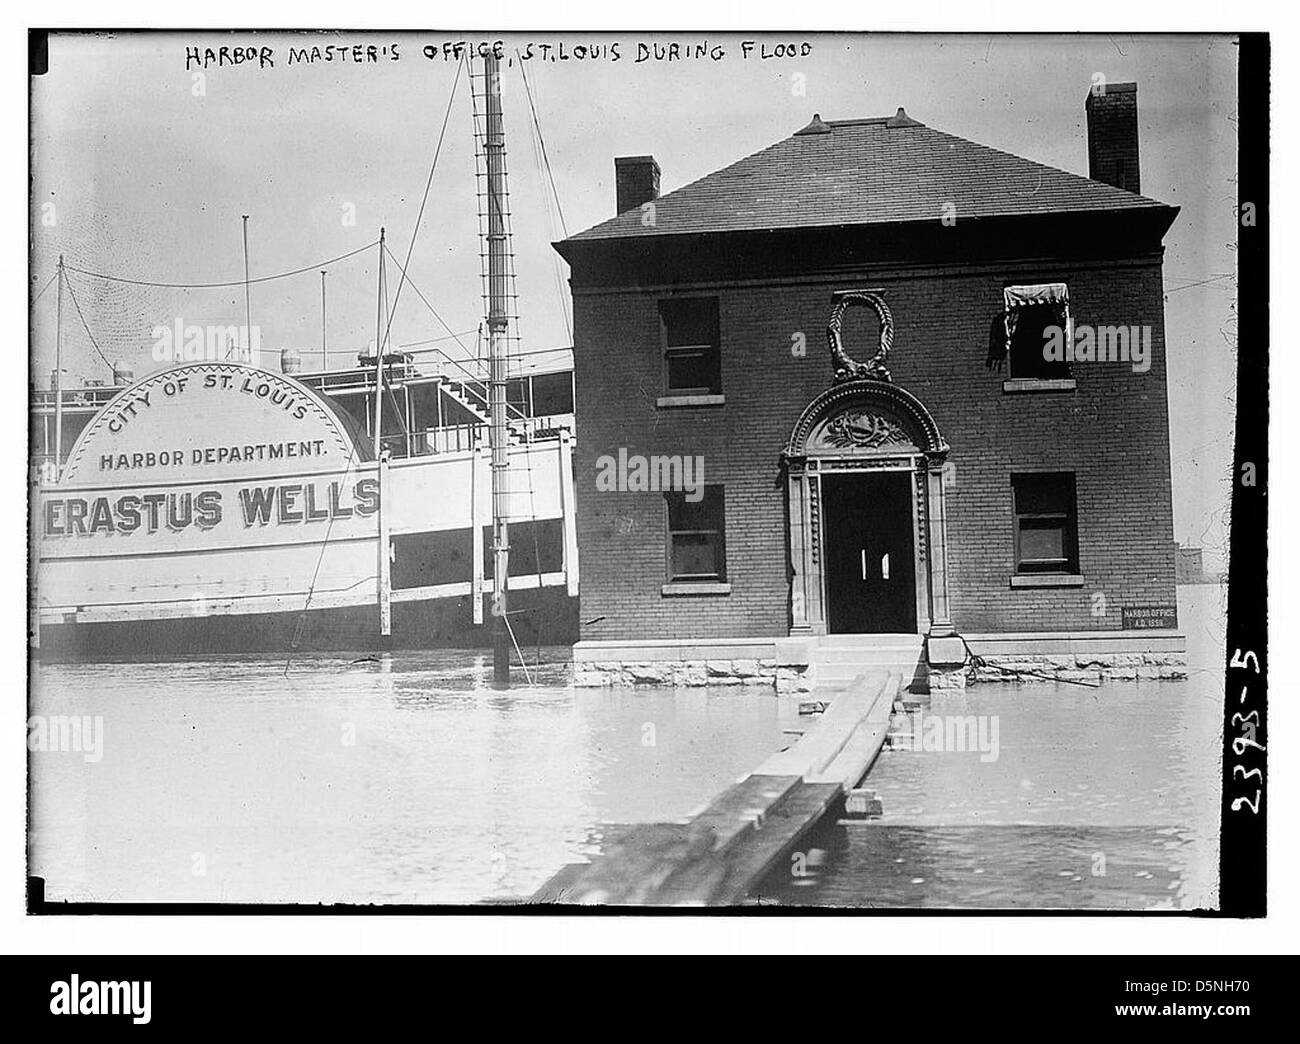 Harbor Master's Office, St. Louis, during flood (LOC) Stock Photo